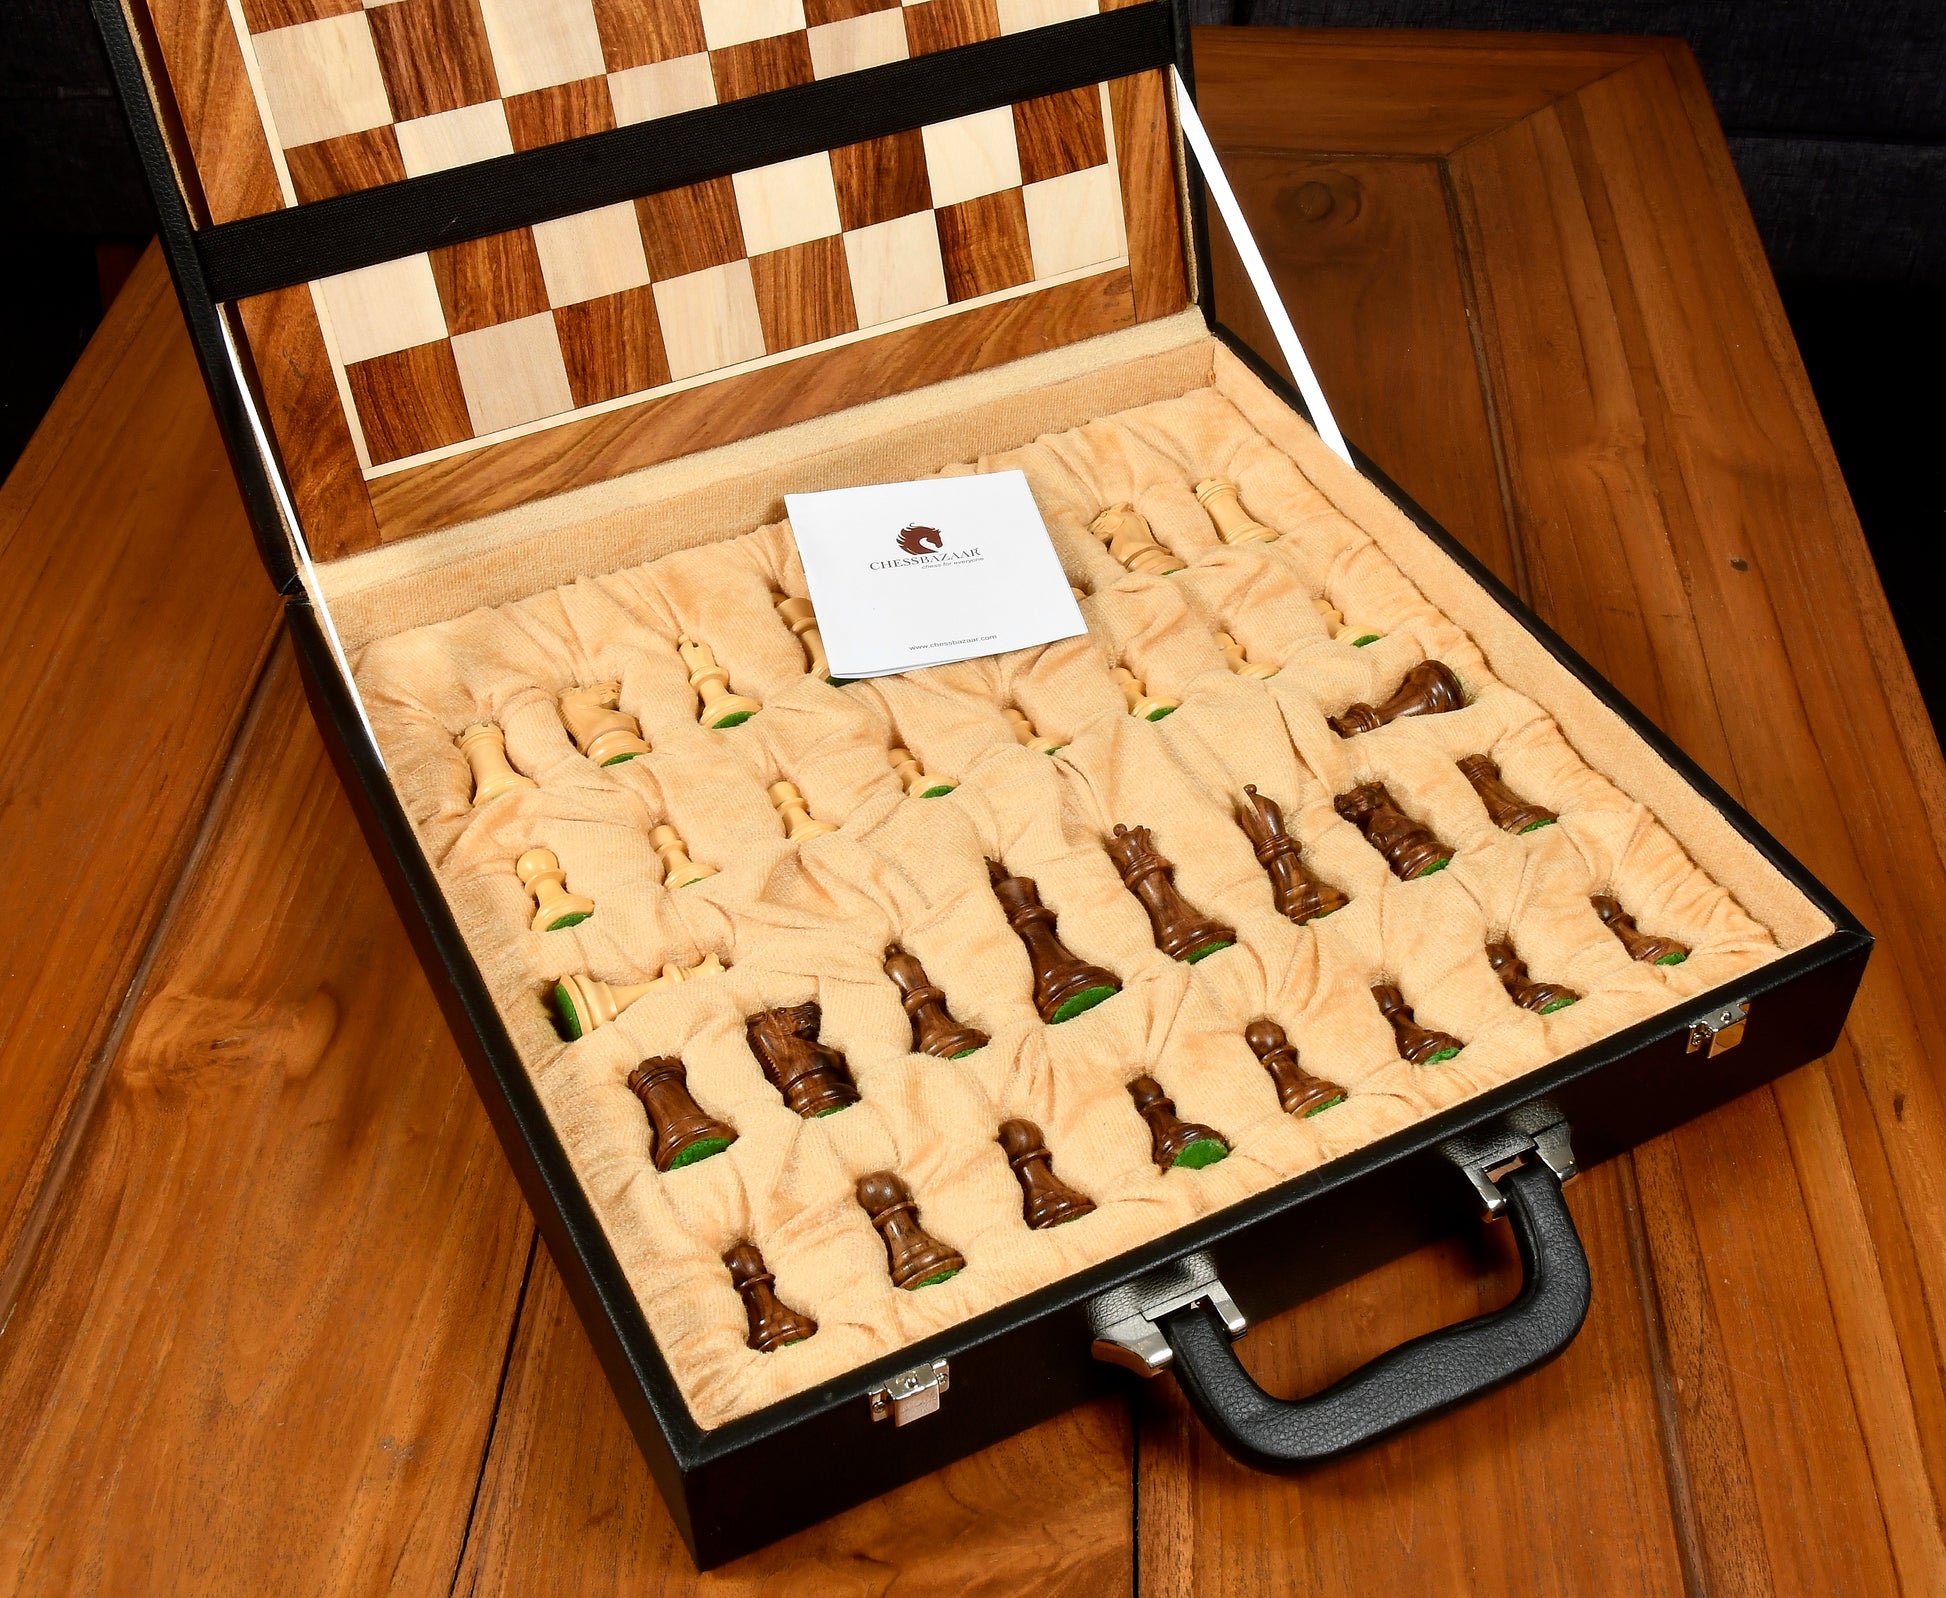 Combo The collector Wooden Staunton Chess Set in Sheesham & Boxwood Pieces with storage case for Wooden Chessboard  and Chess pieces-2.8" King